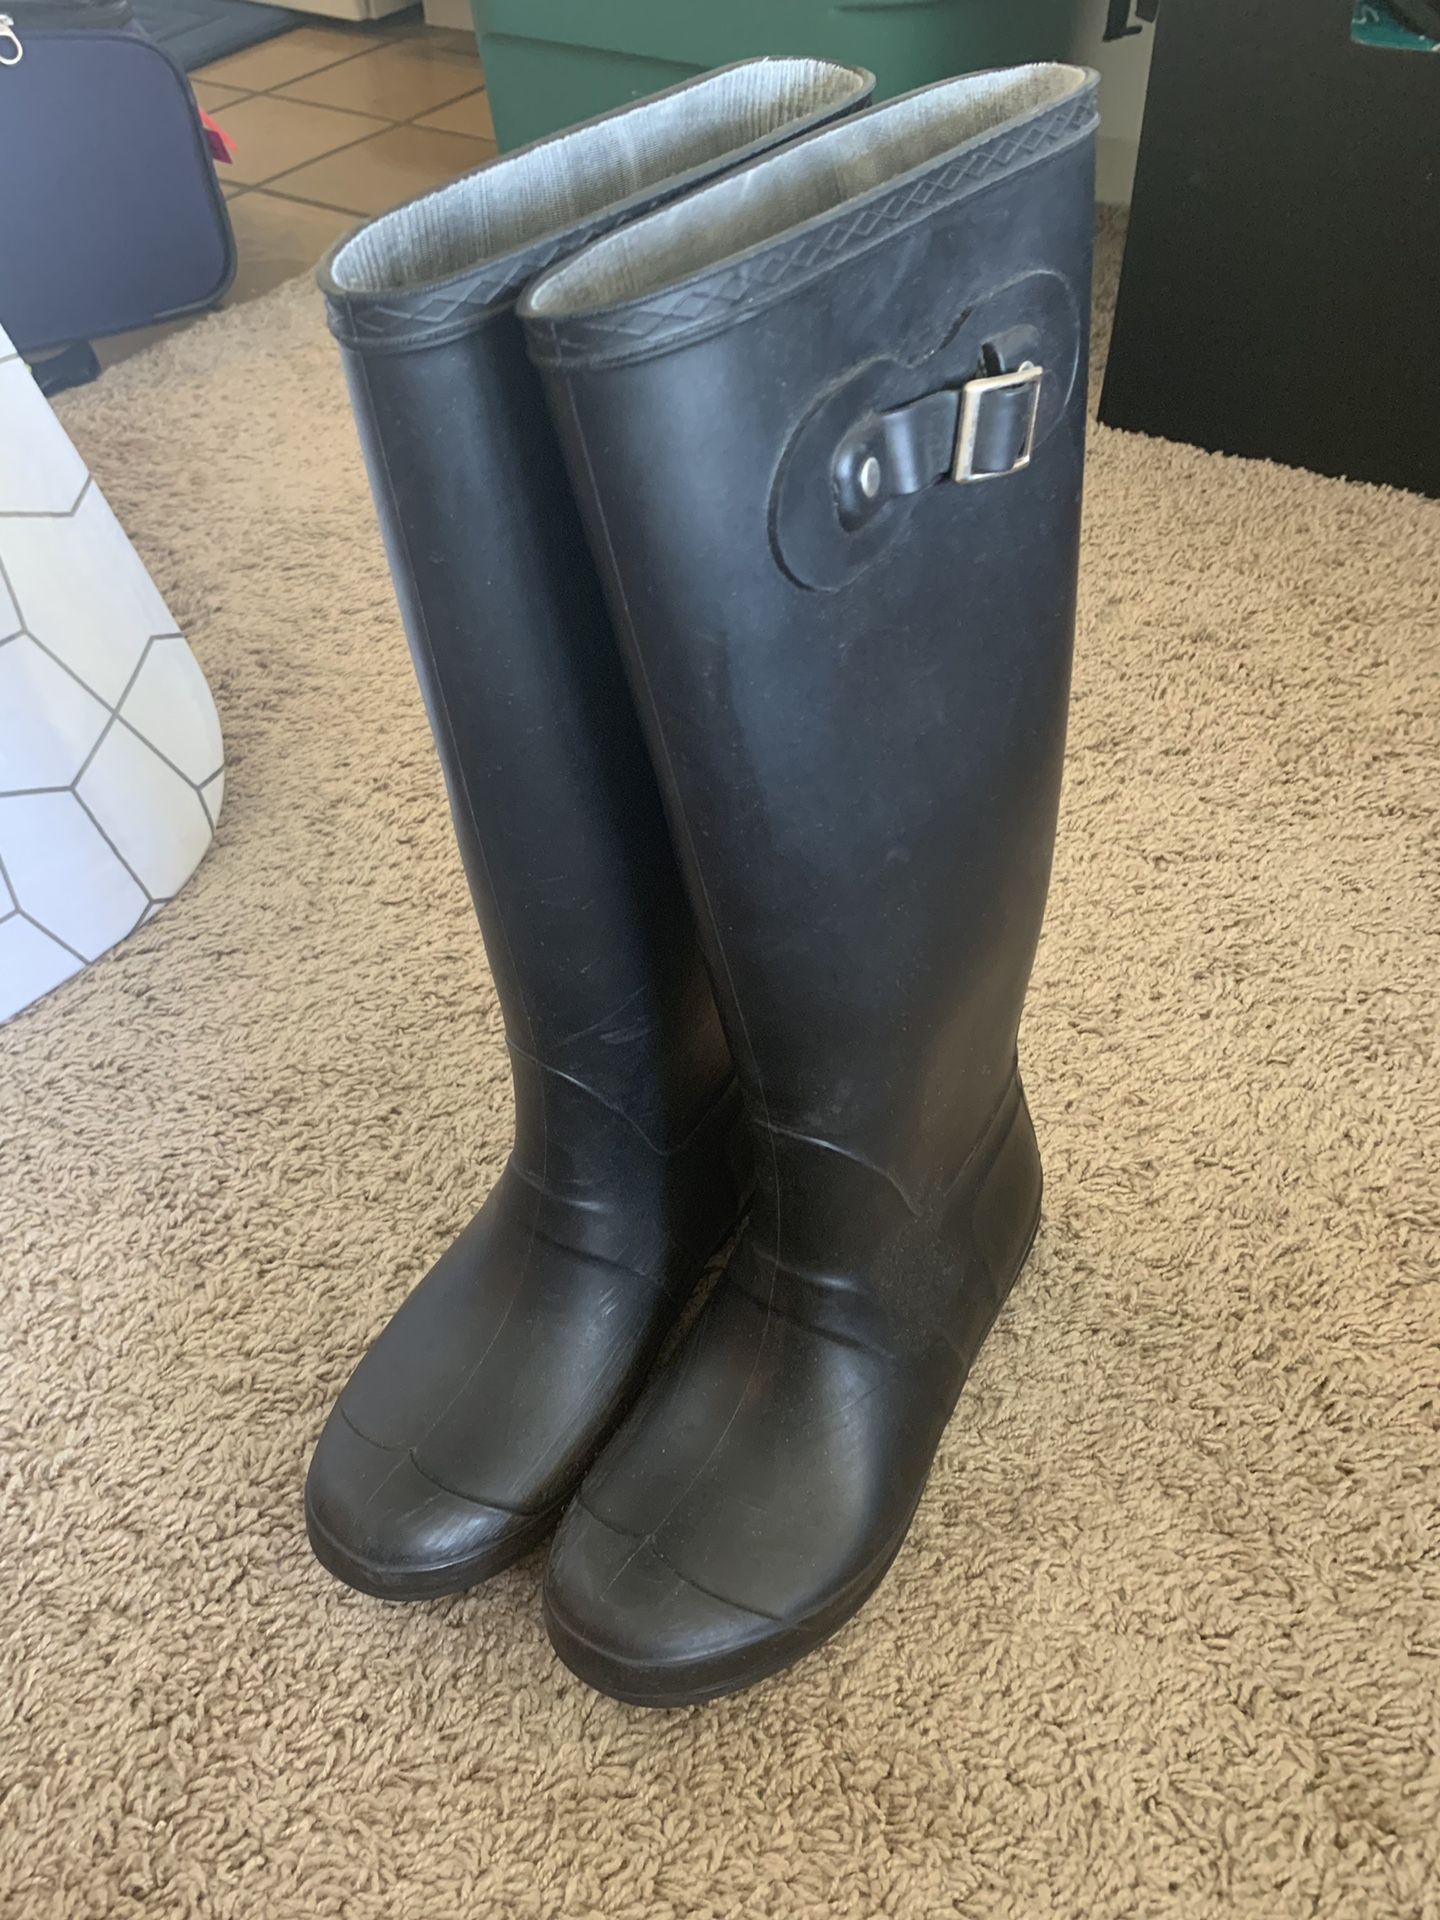 Tall rain boots size 7.5-8, scuffs in front as pictured but overall good condition!